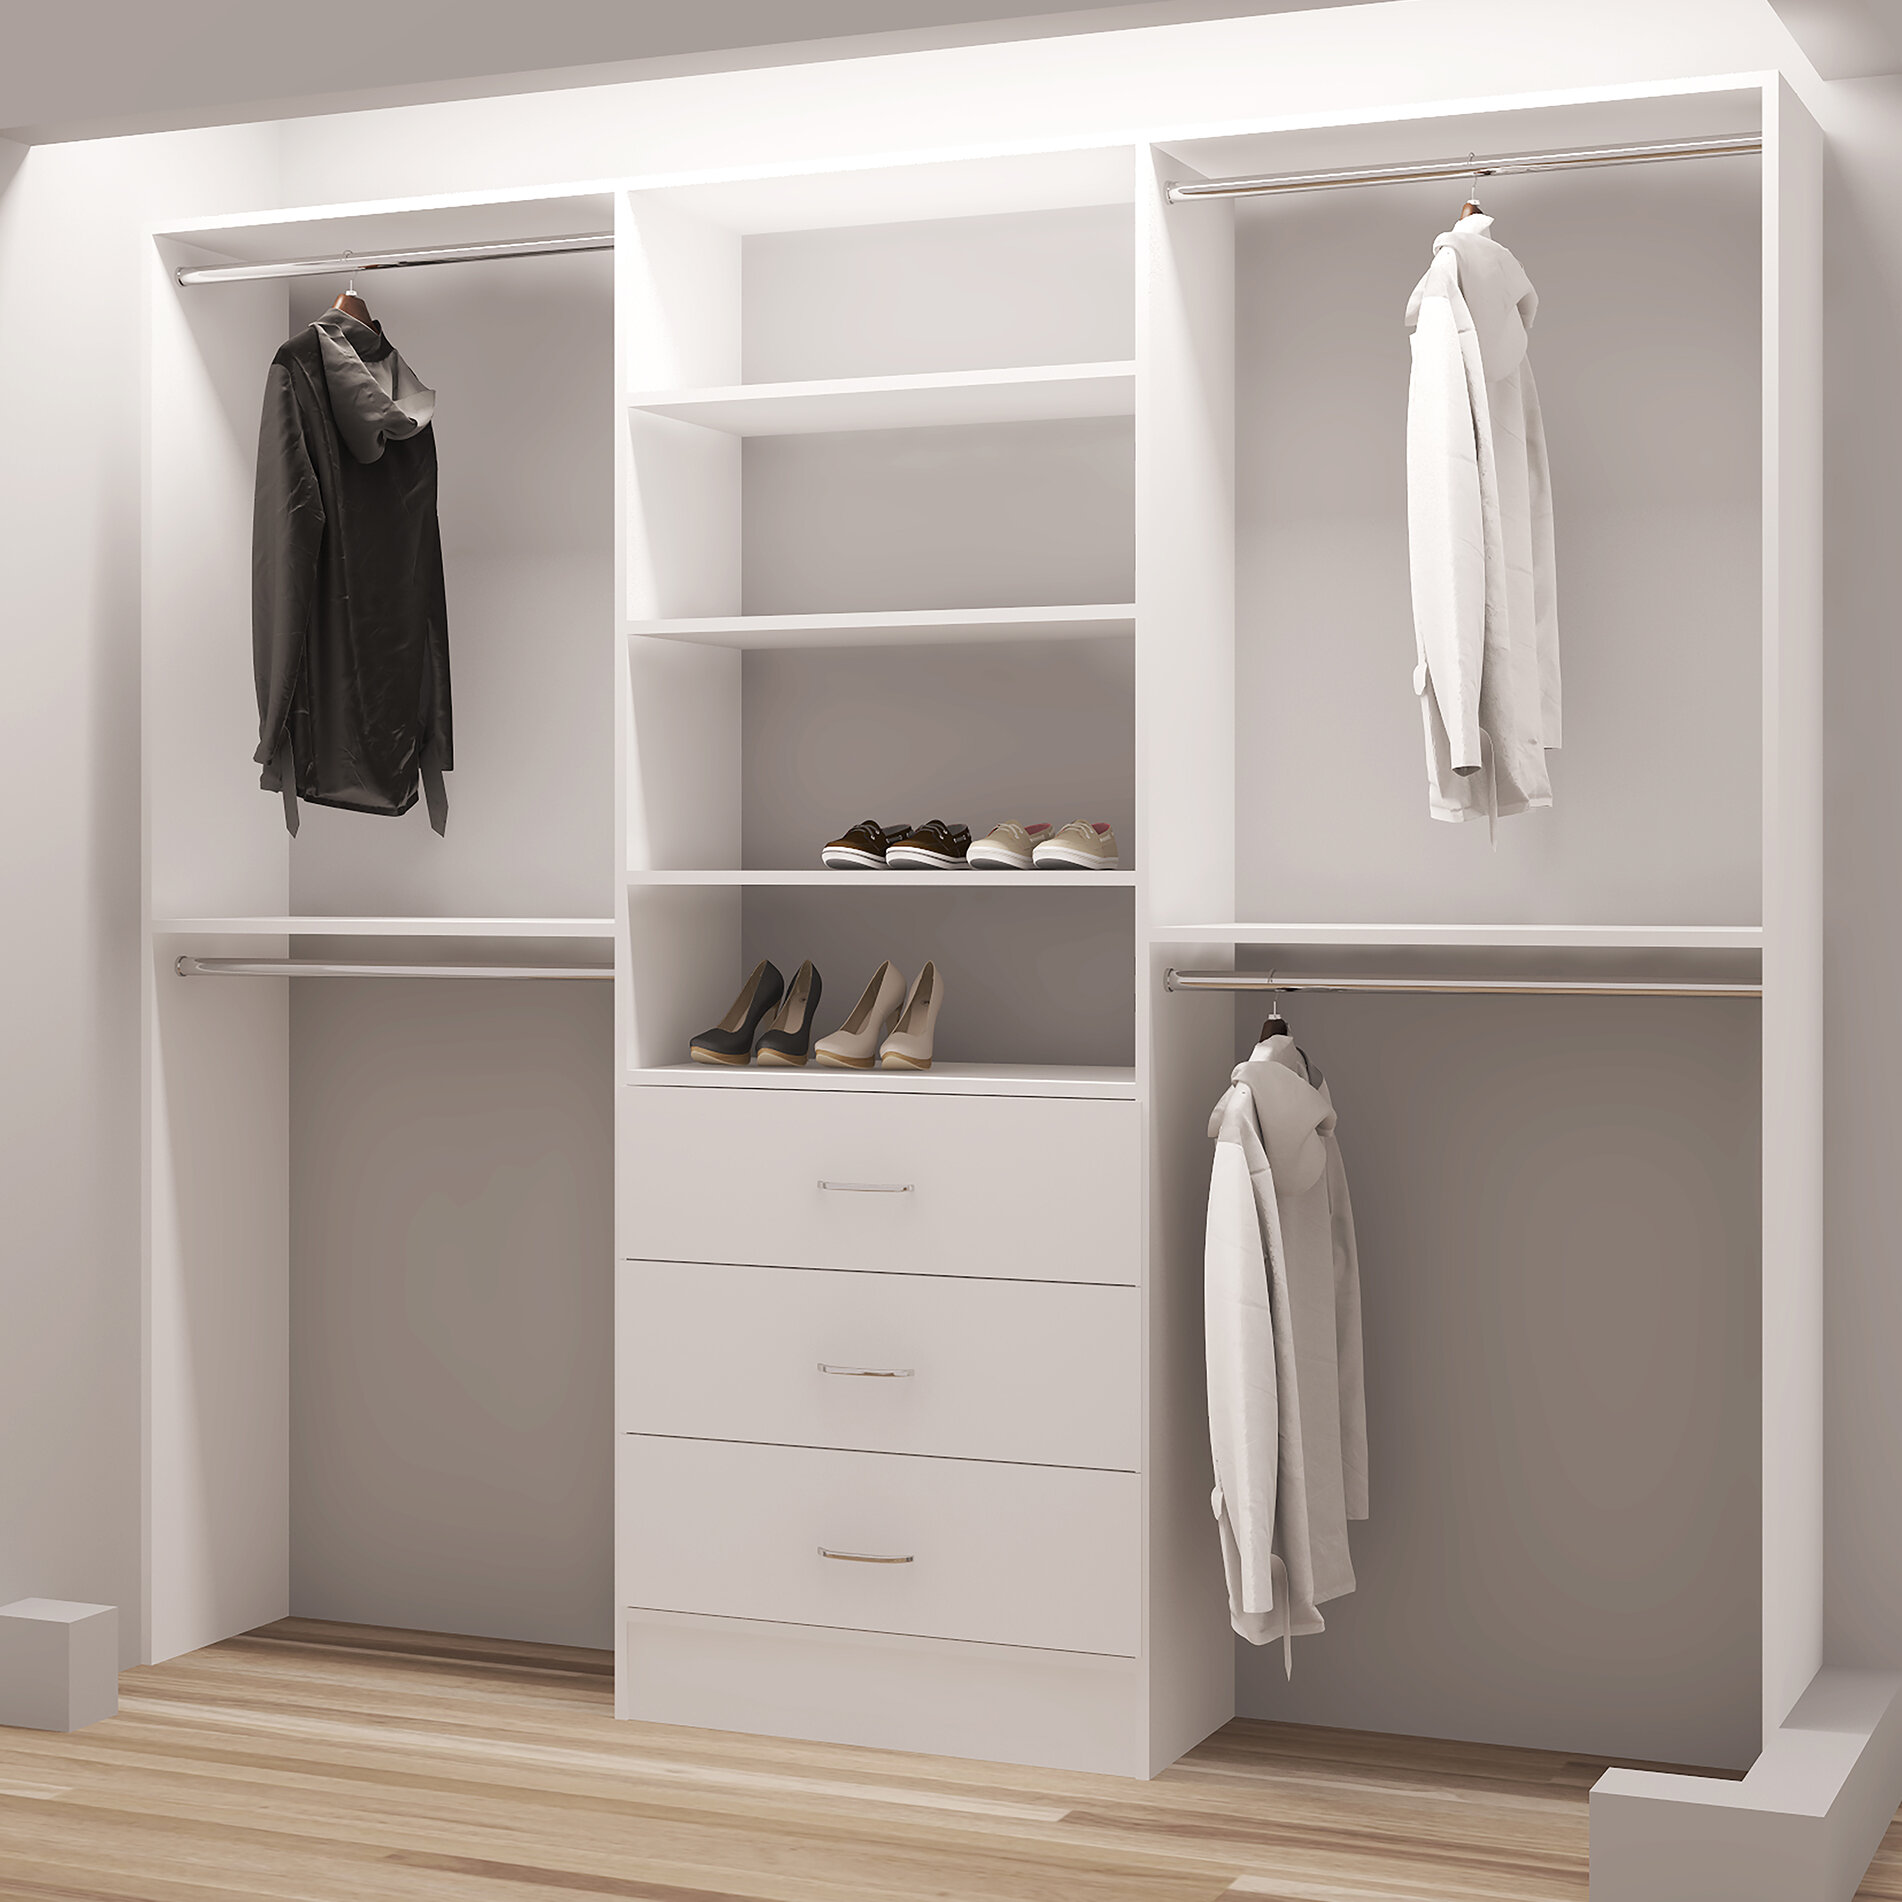 Free Standing Closet Systems You Ll Love In 2020 Wayfair,Home Is Where The Heart Is Meme